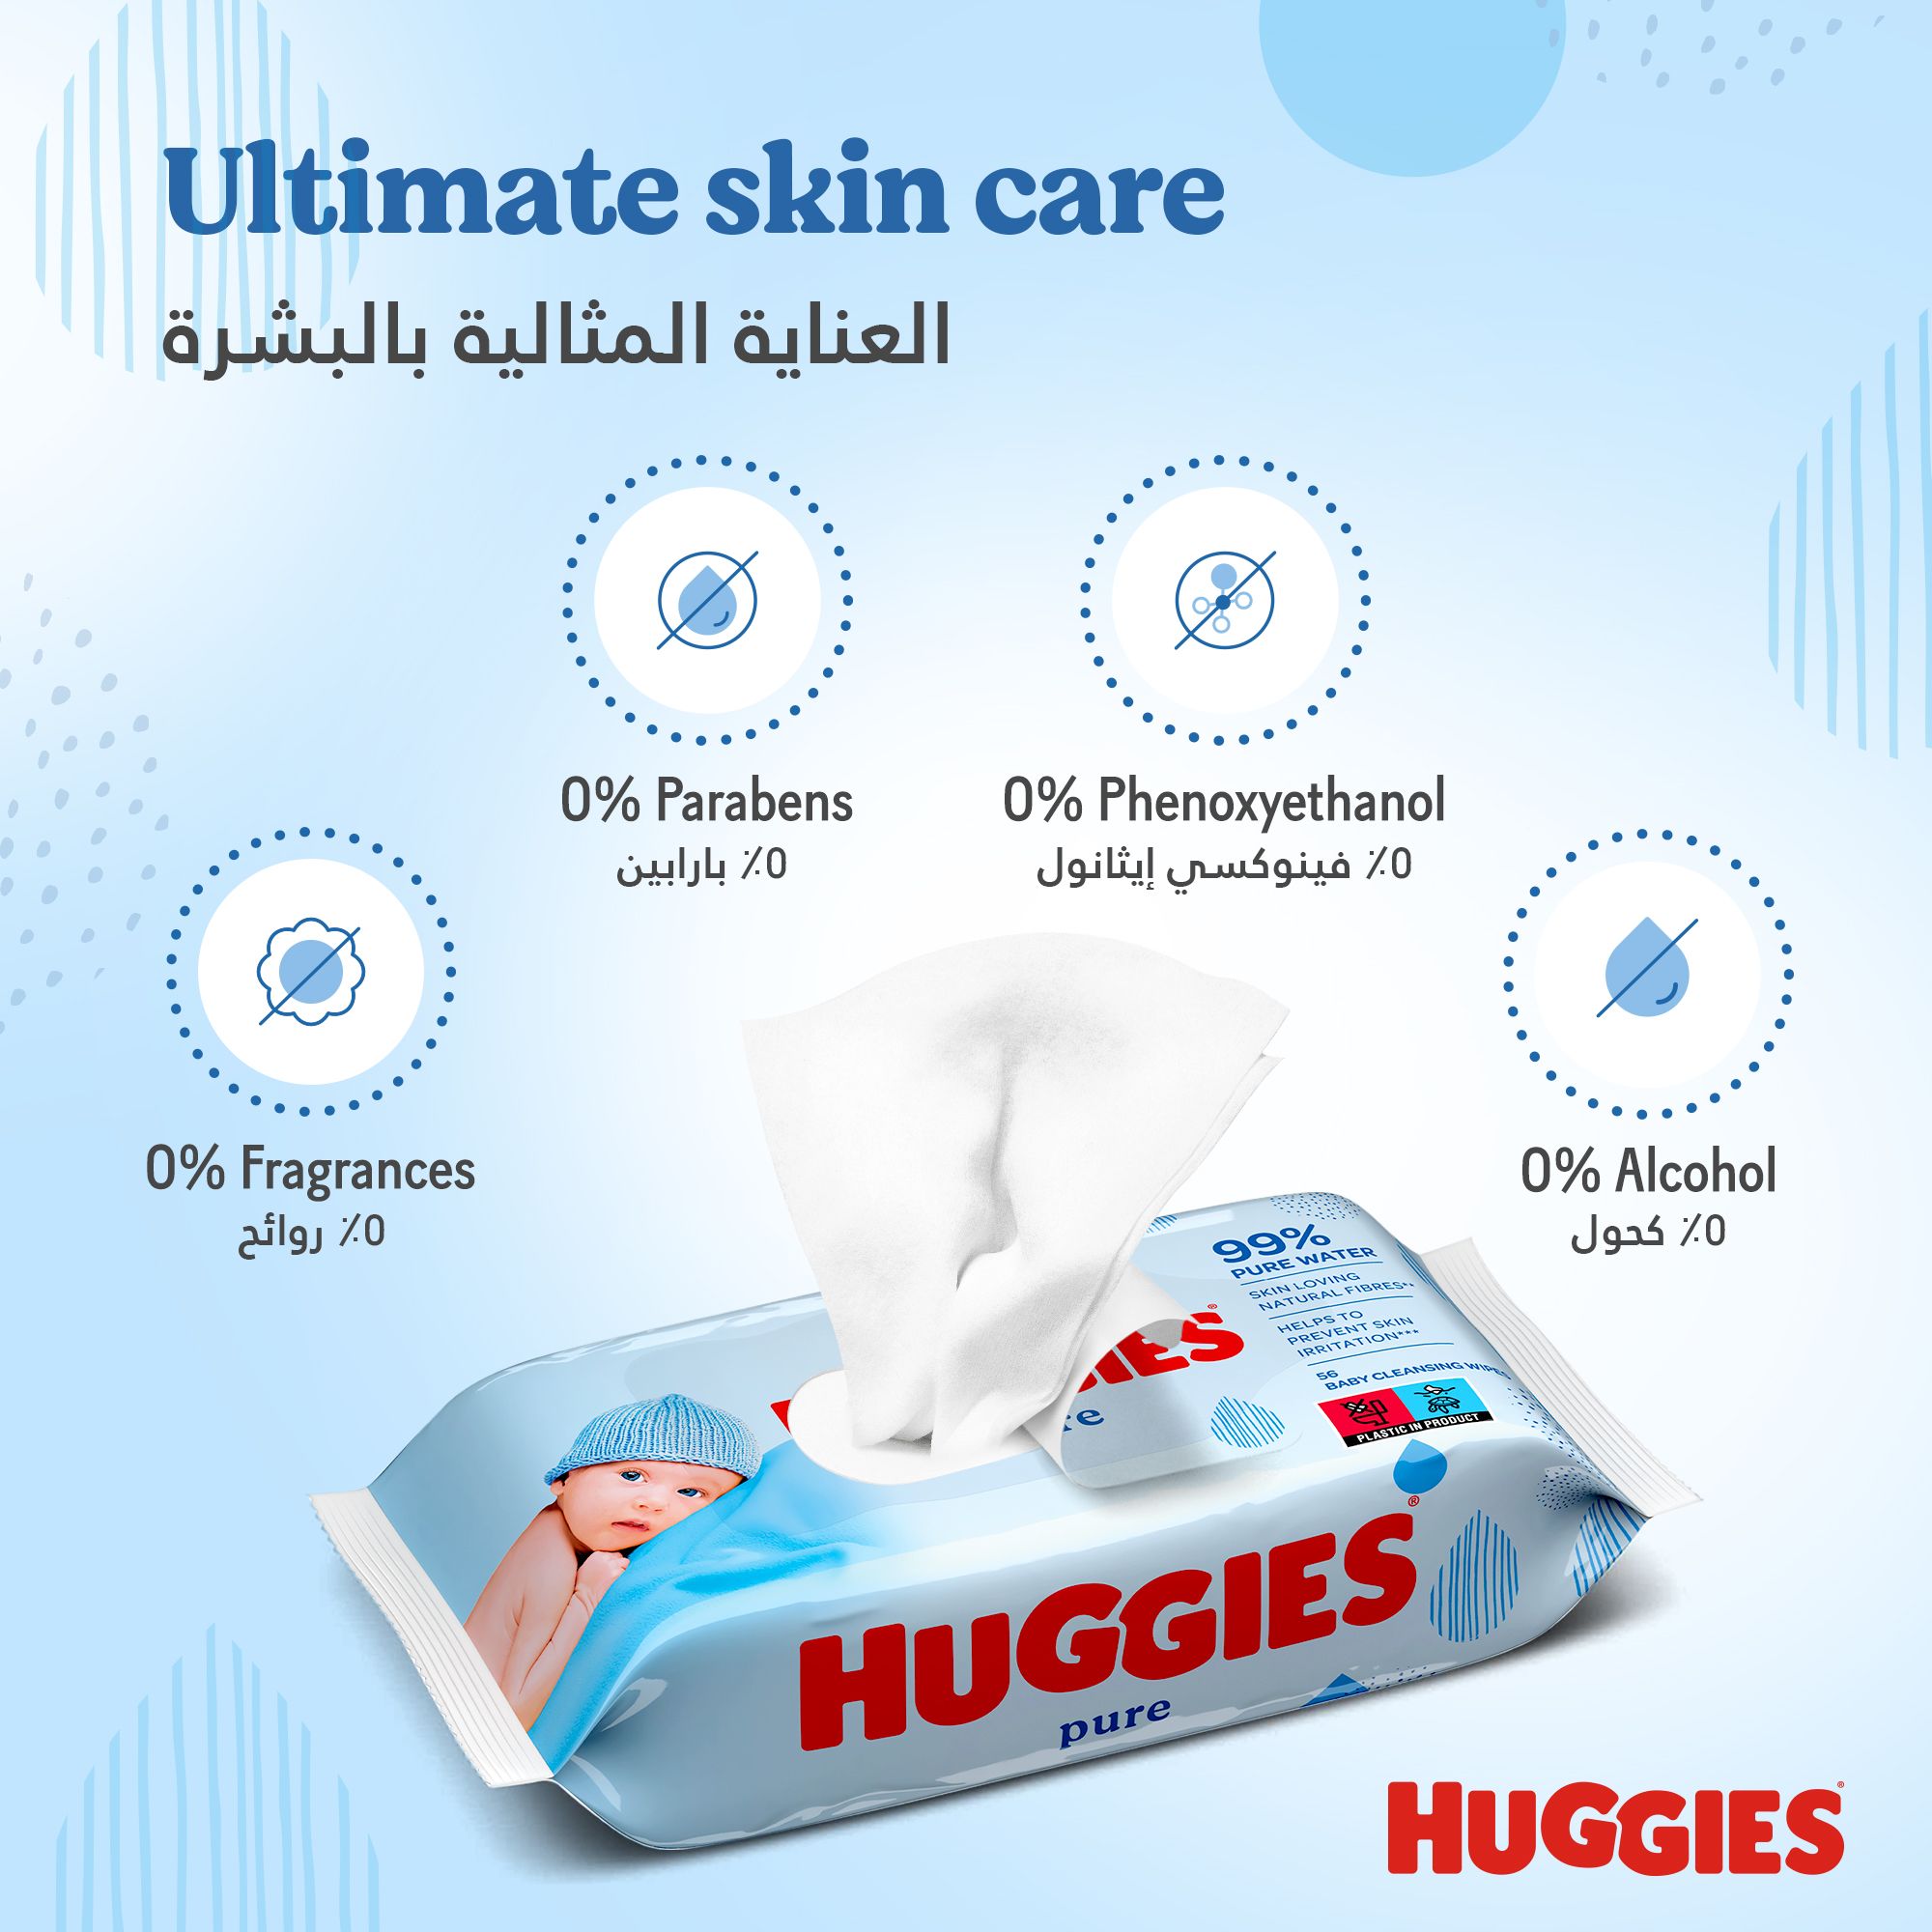 Huggies Pure Baby Wipes, 99% Pure Water Wipes, 3 Pack x 56 Wipes (168 Wipes)